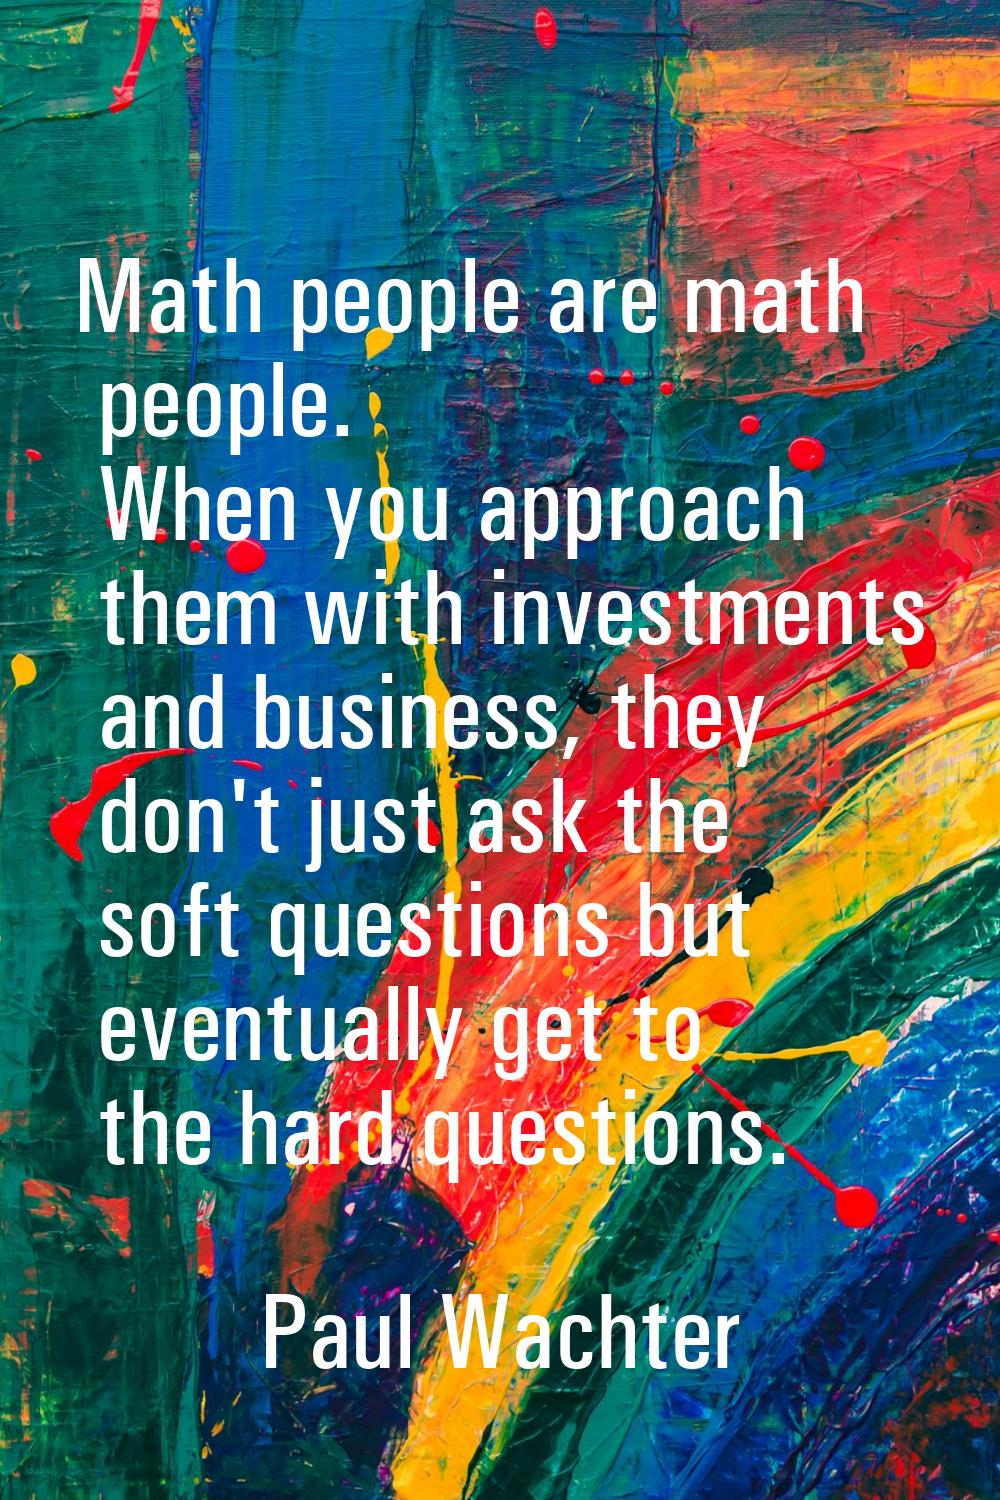 Math people are math people. When you approach them with investments and business, they don't just 